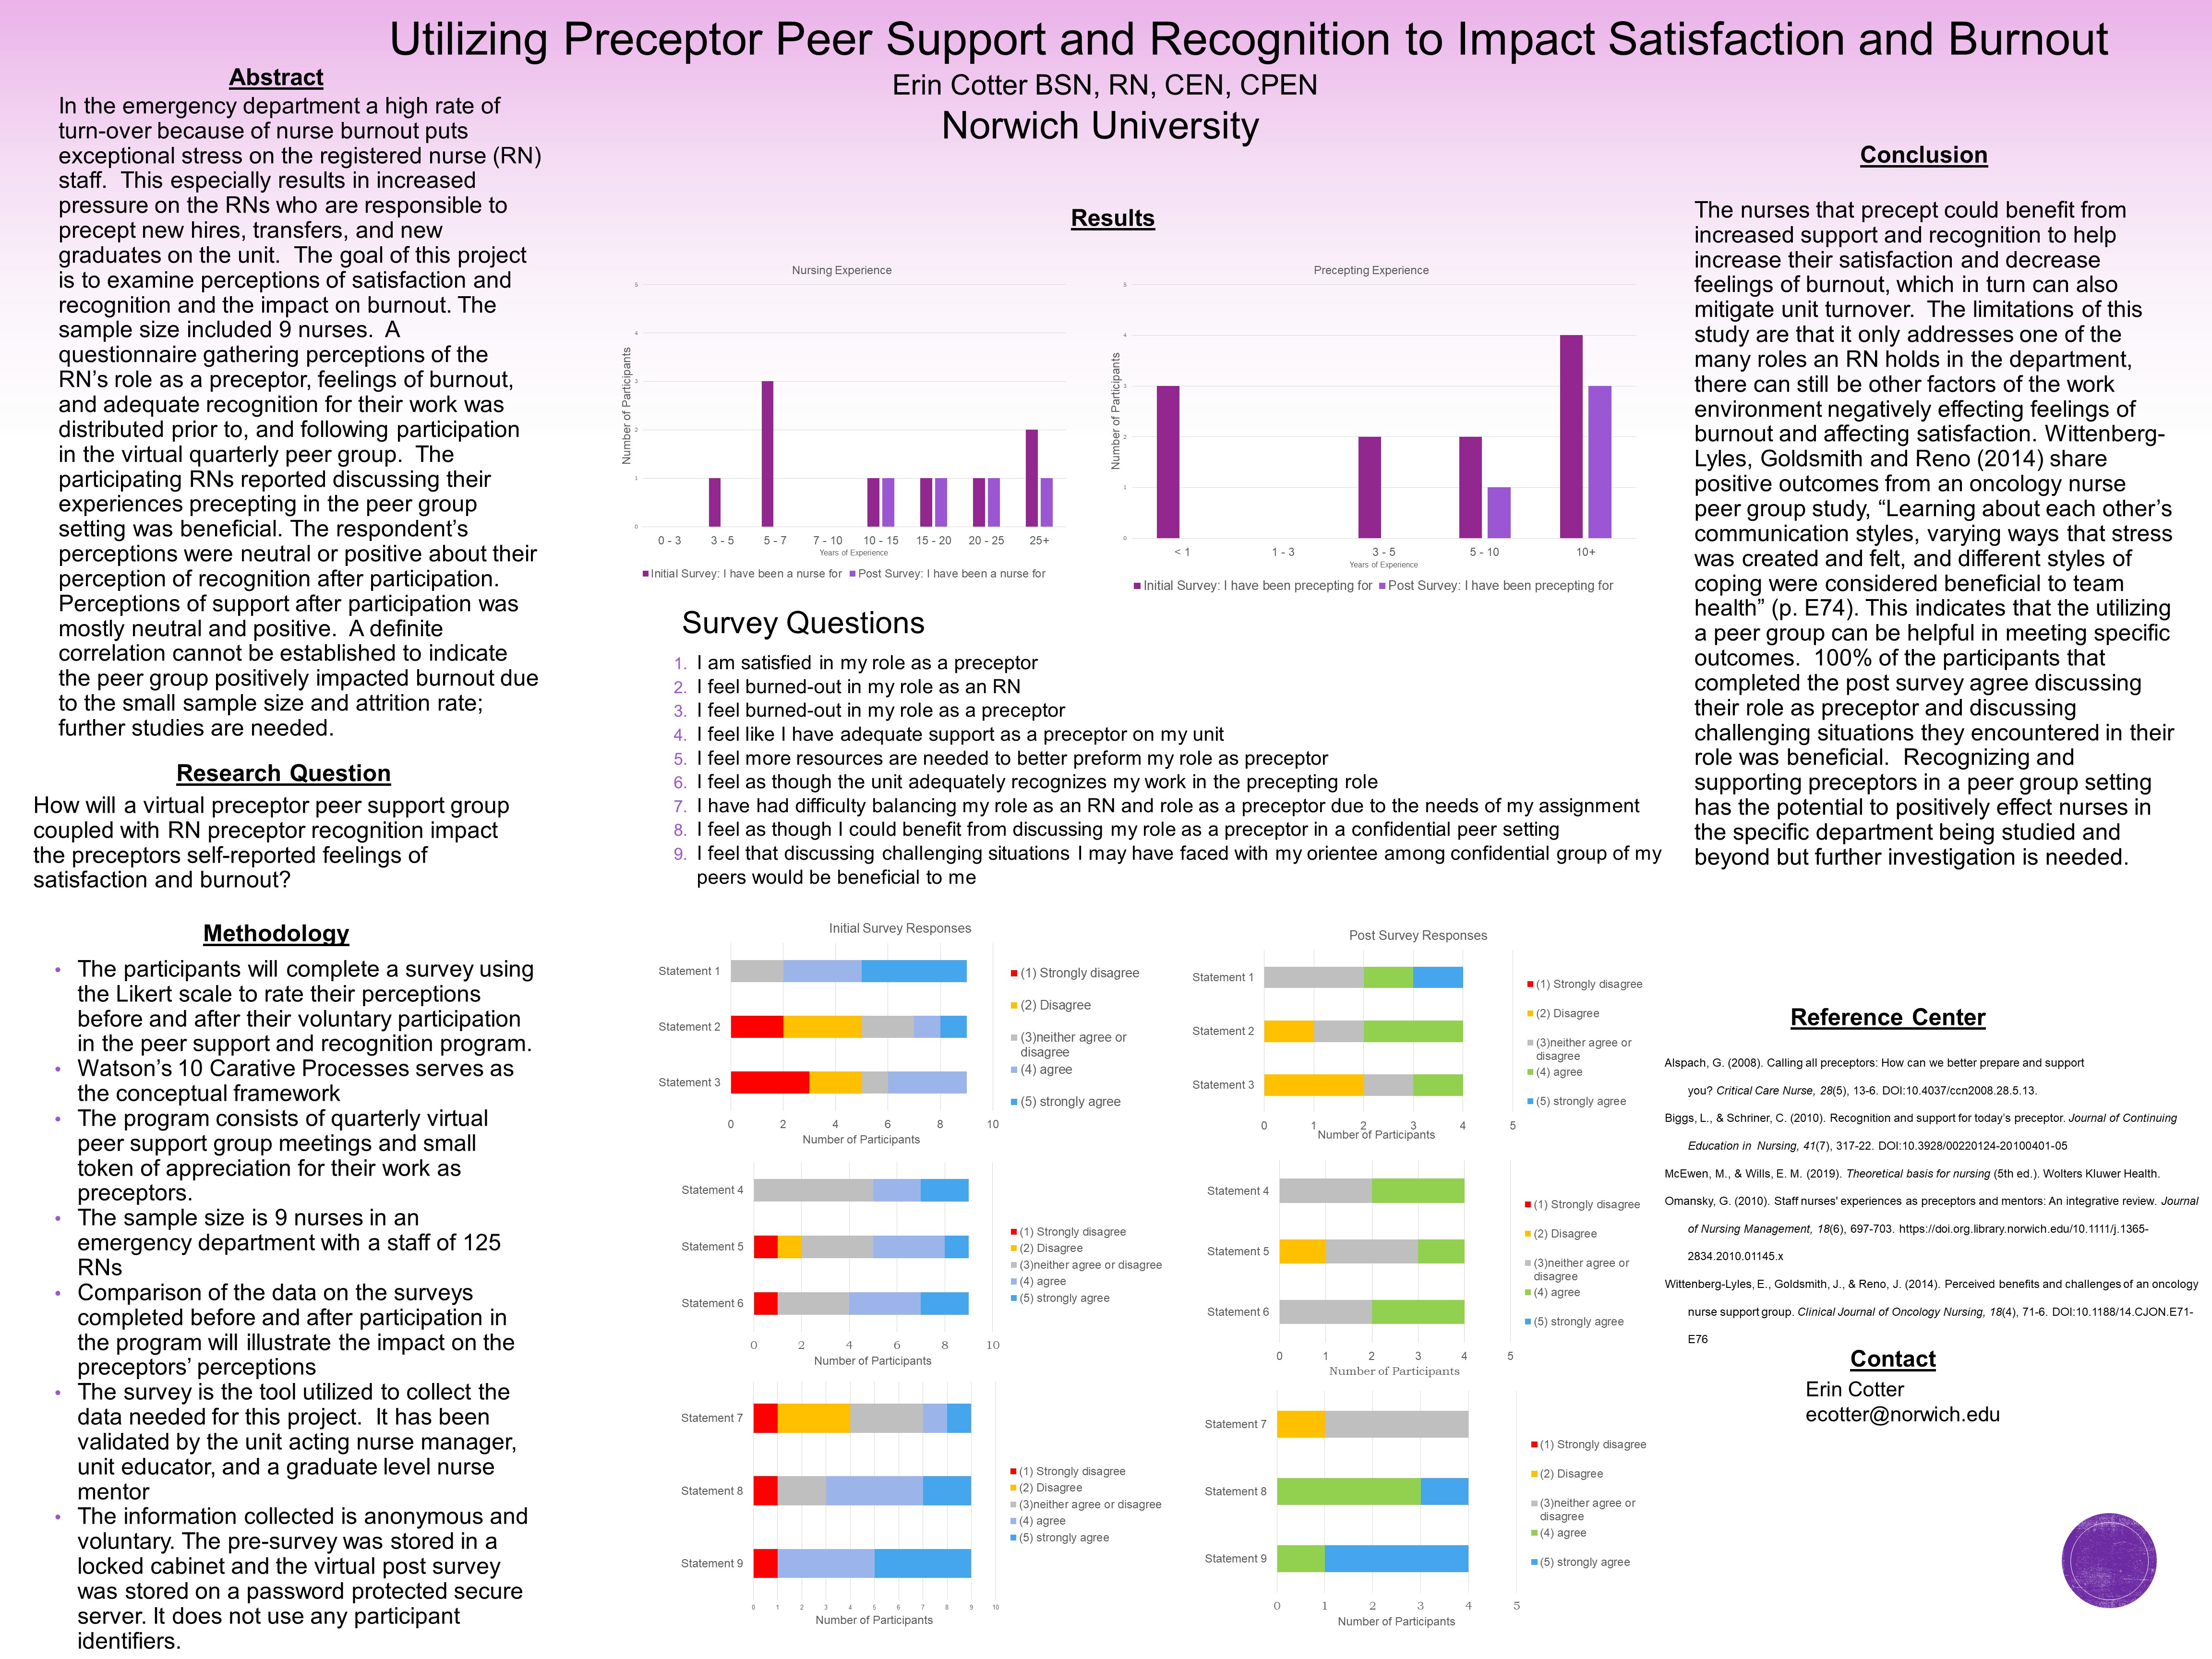 Showcase Image for Utilizing Preceptor Peer Support and Recognition to Impact Satisfaction and Burnout 